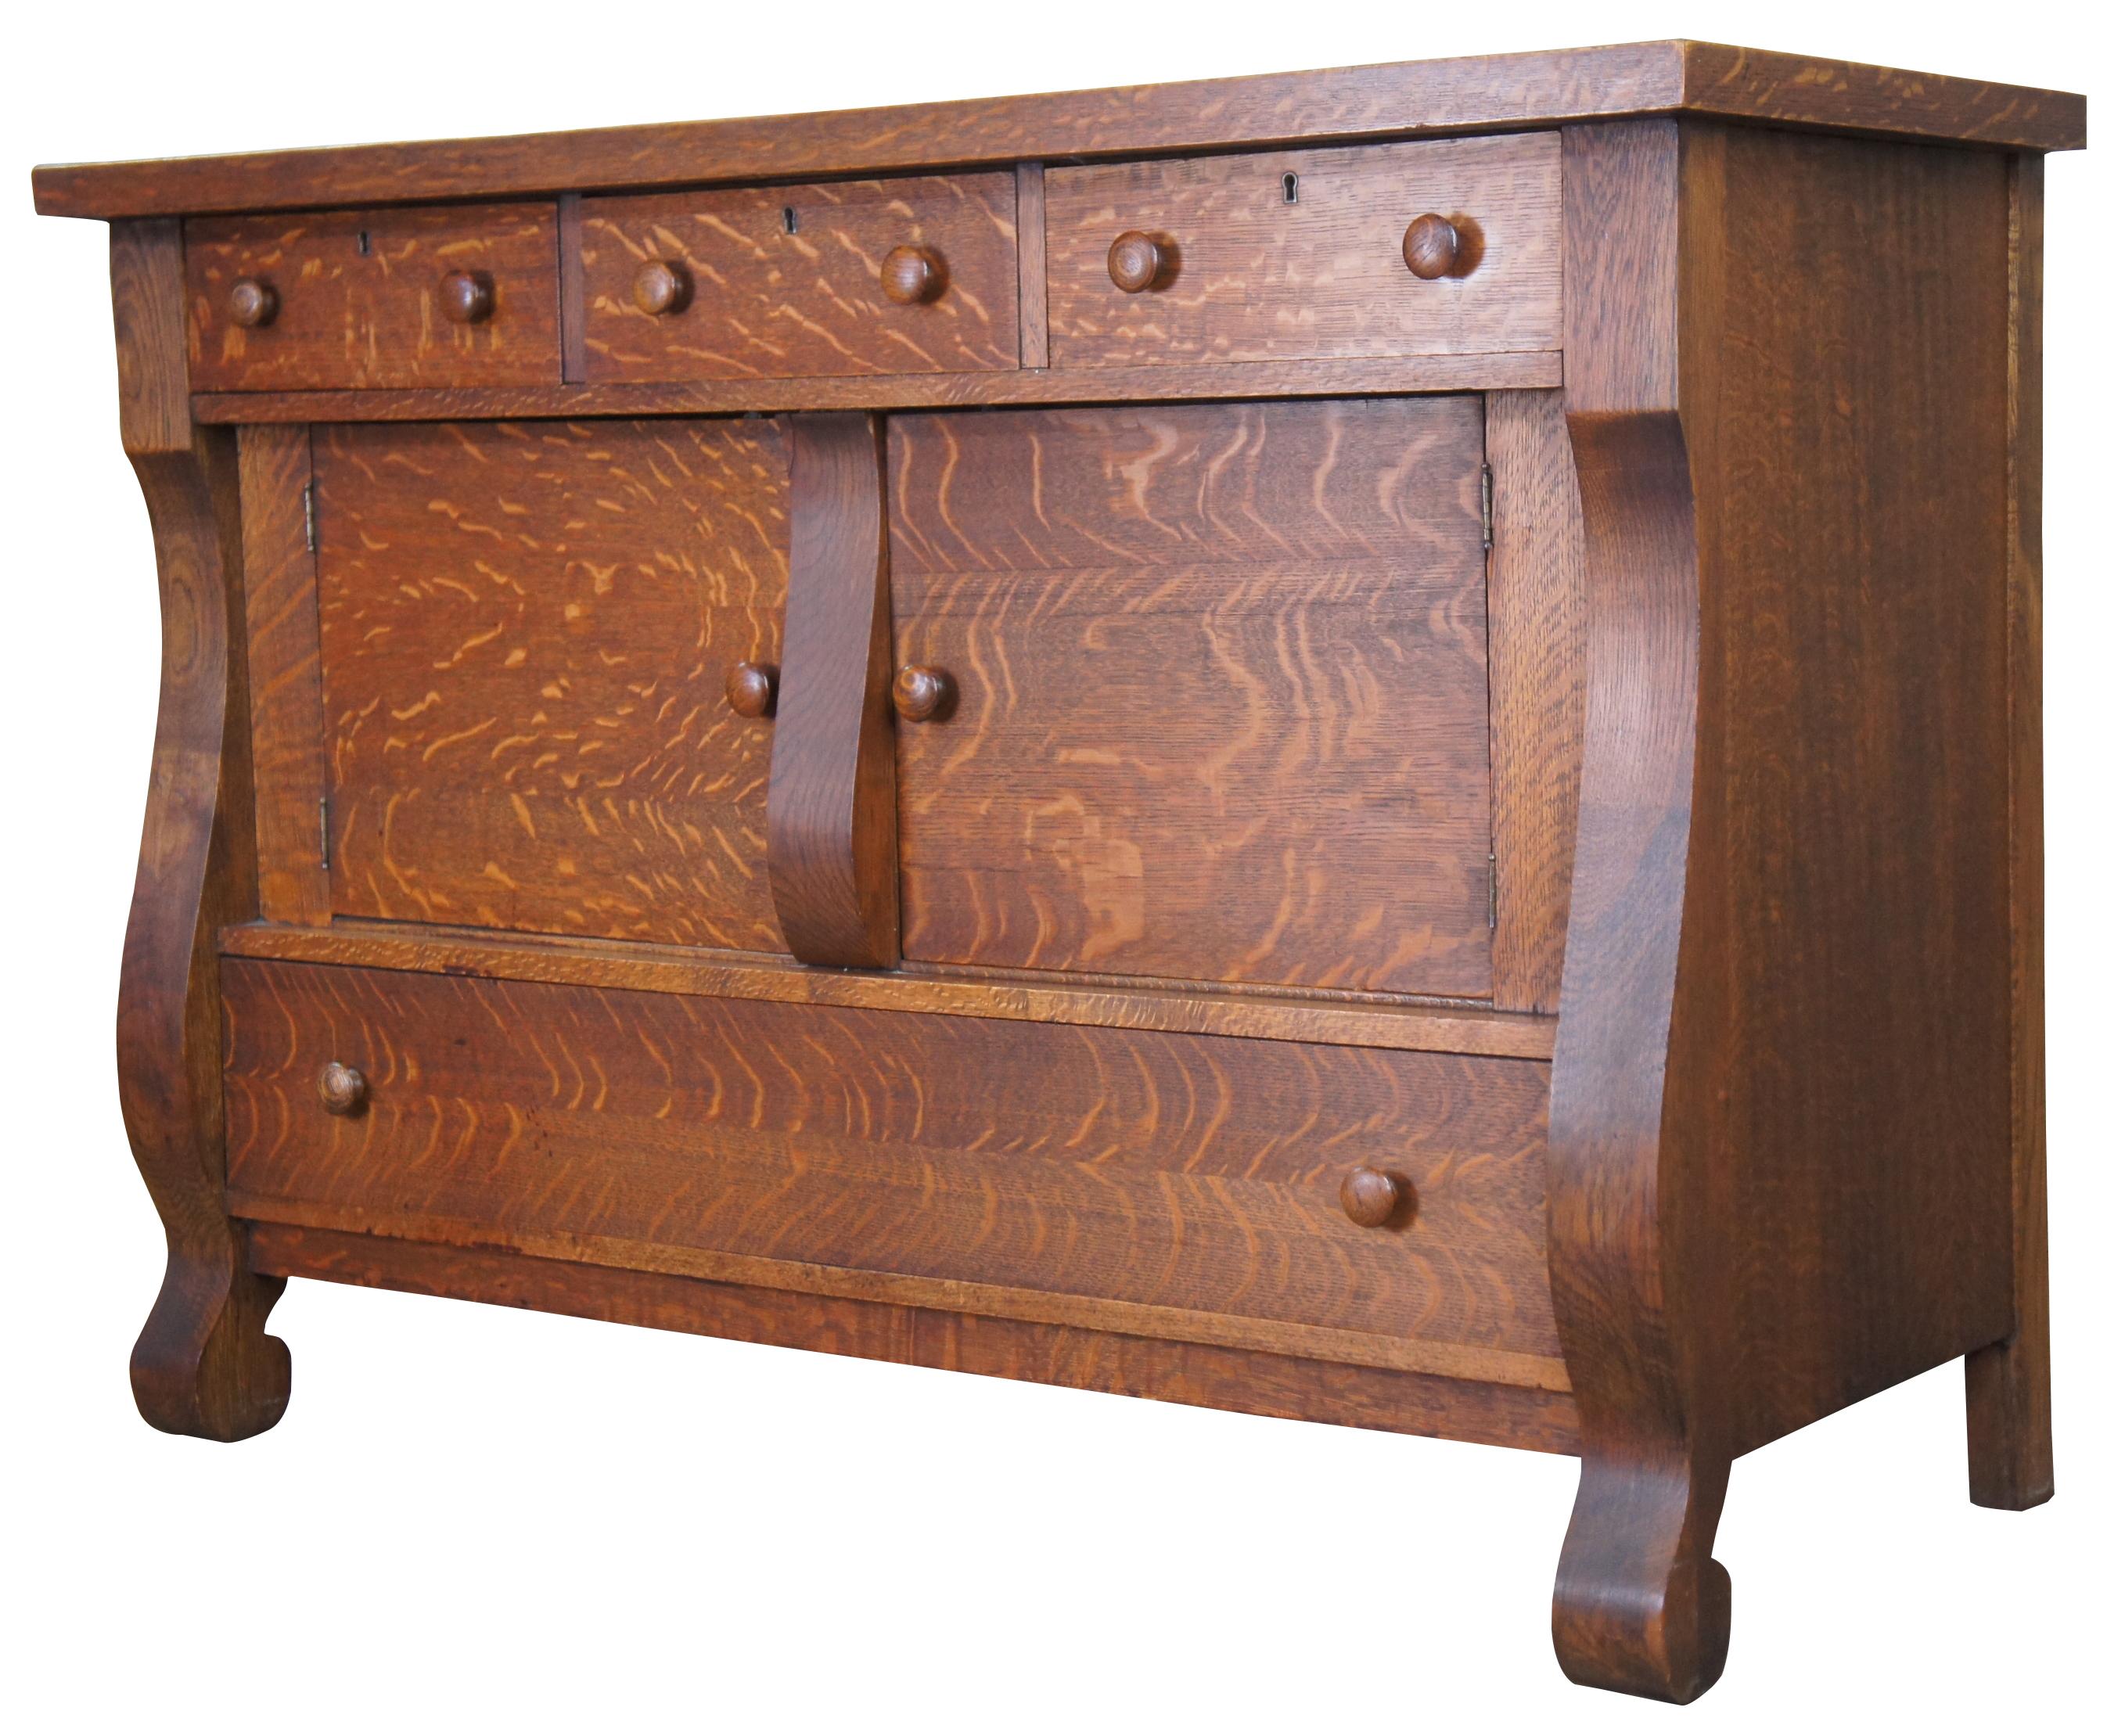 Early 1900s quartersawn oak buffet or server. Features a rectangular form with robust outer legs leading to scrolled feet. Includes three upper dovetailed drawers, a large central cabinet and full size lower drawer. Measure: 54